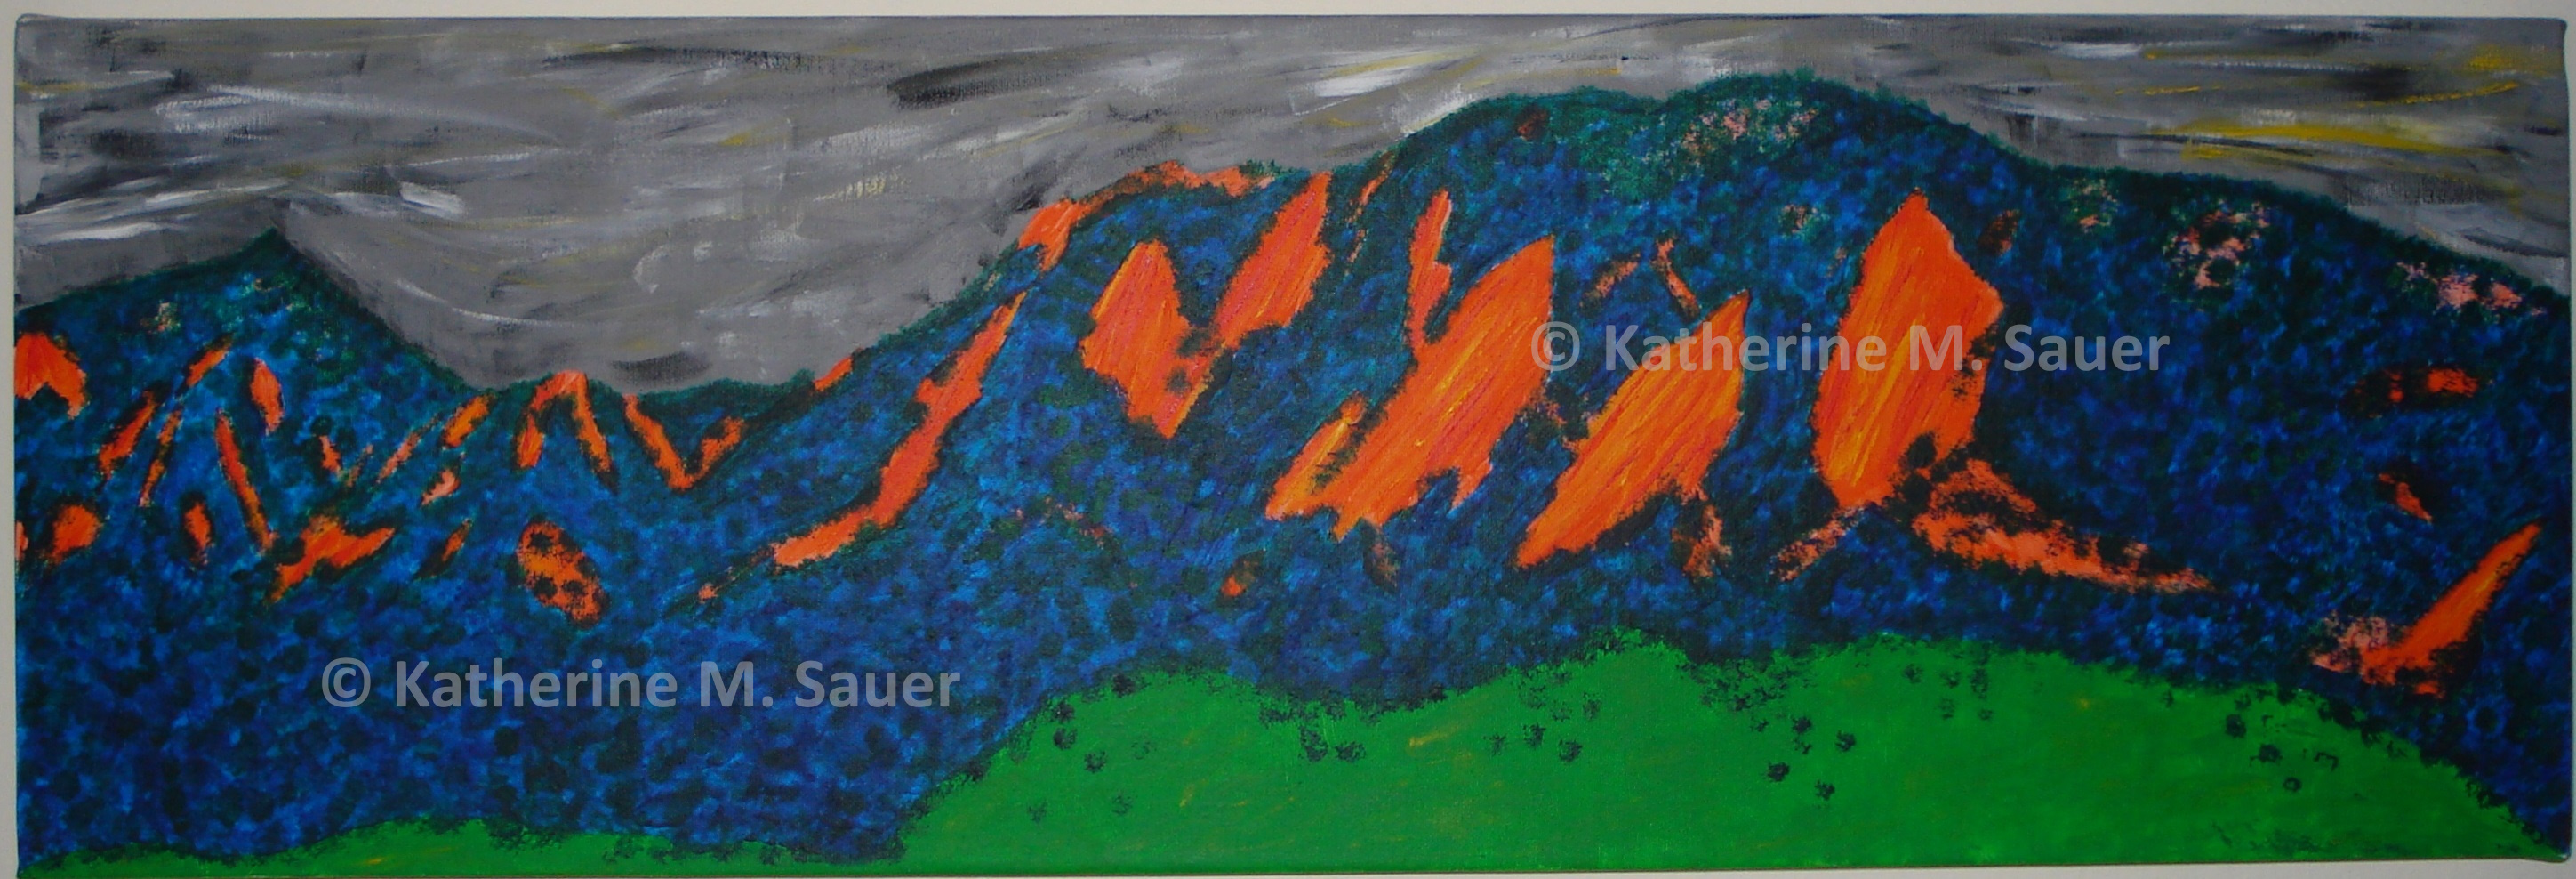 a painting of the Flatirons mountains outside of Boulder, CO